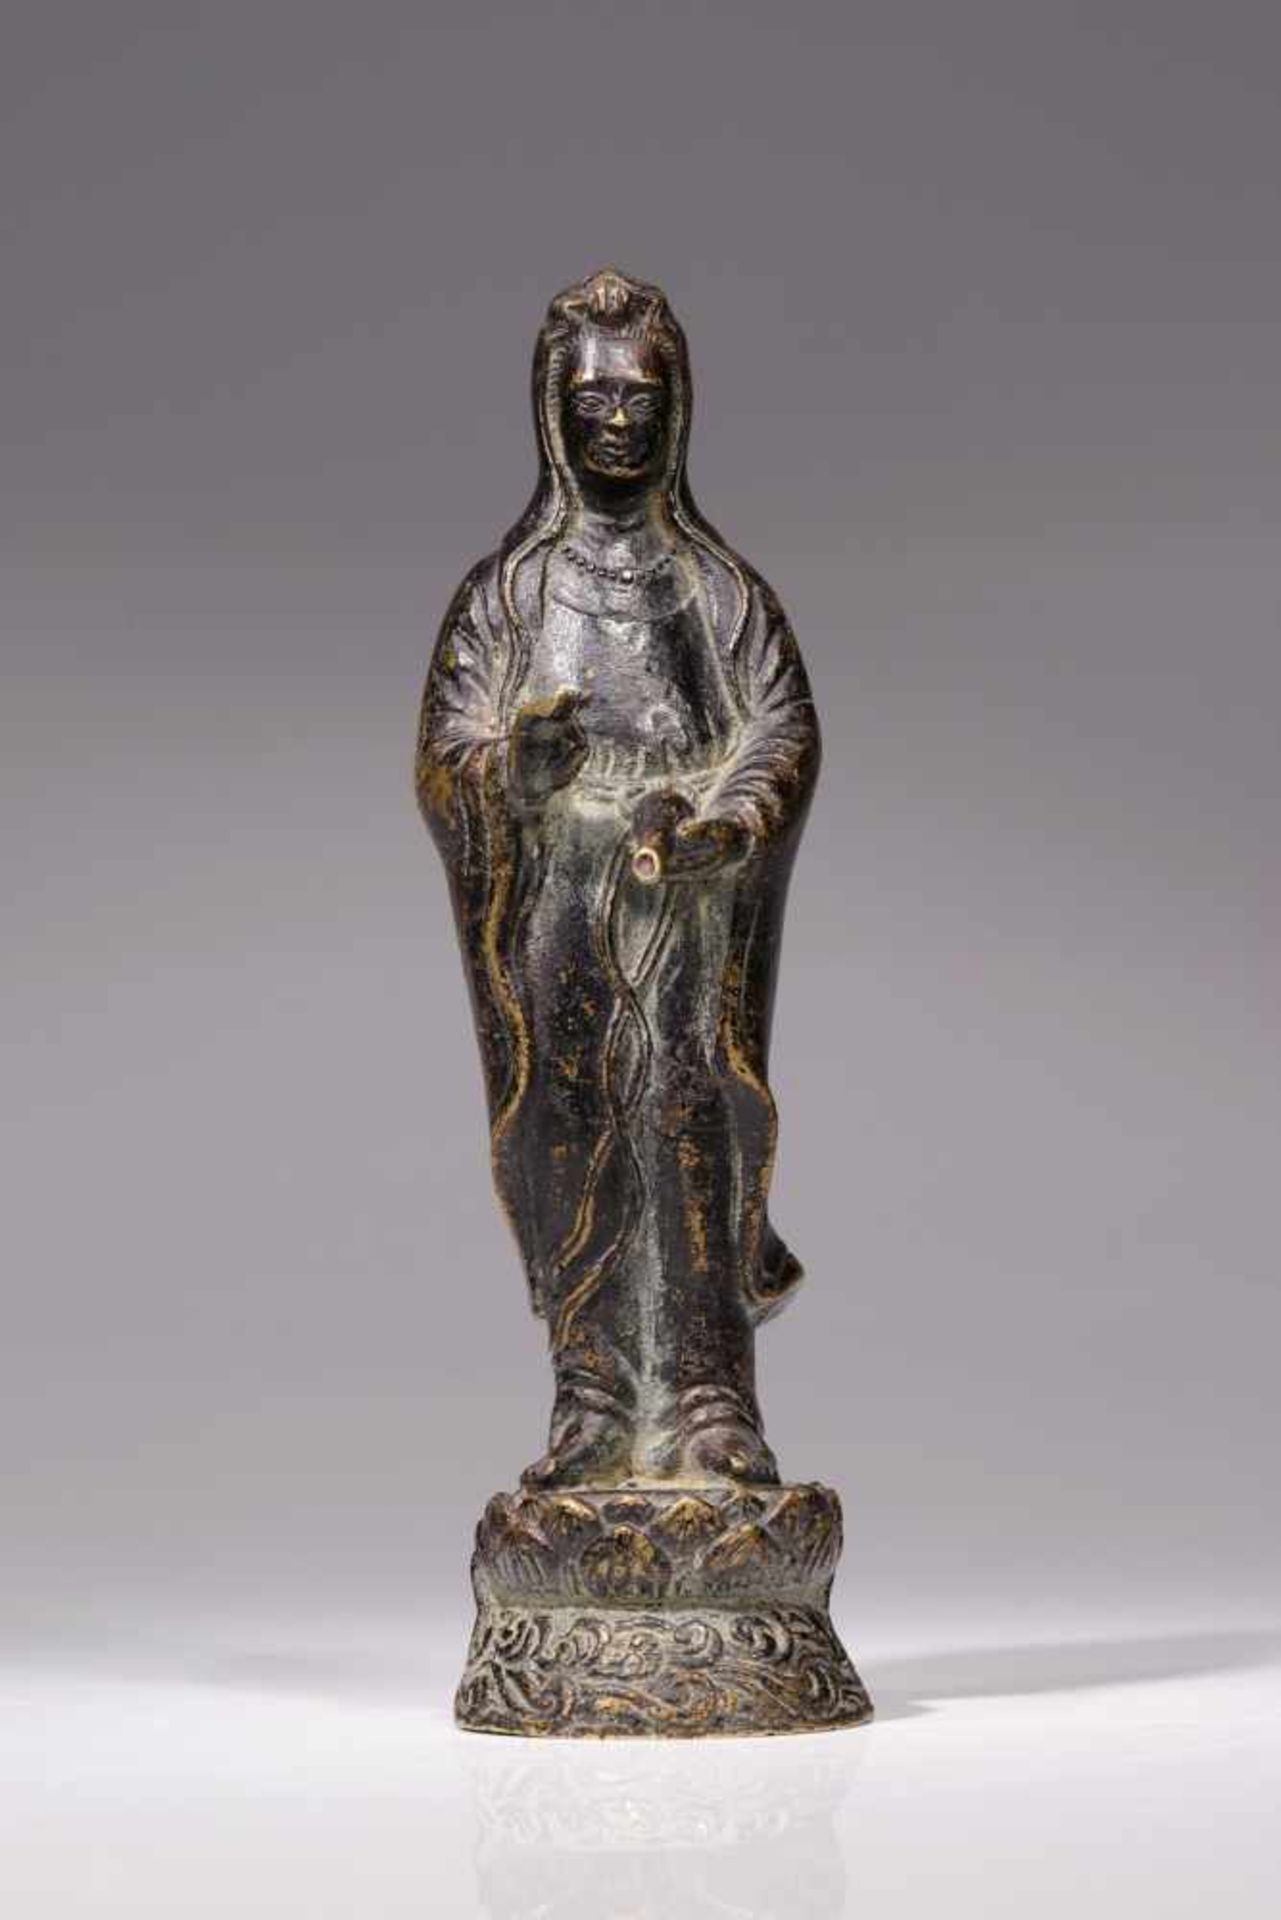 GUANYINbronze,China, 19th century,Size: 20 cmStanding Guanyin on lotus base holding a vase in the